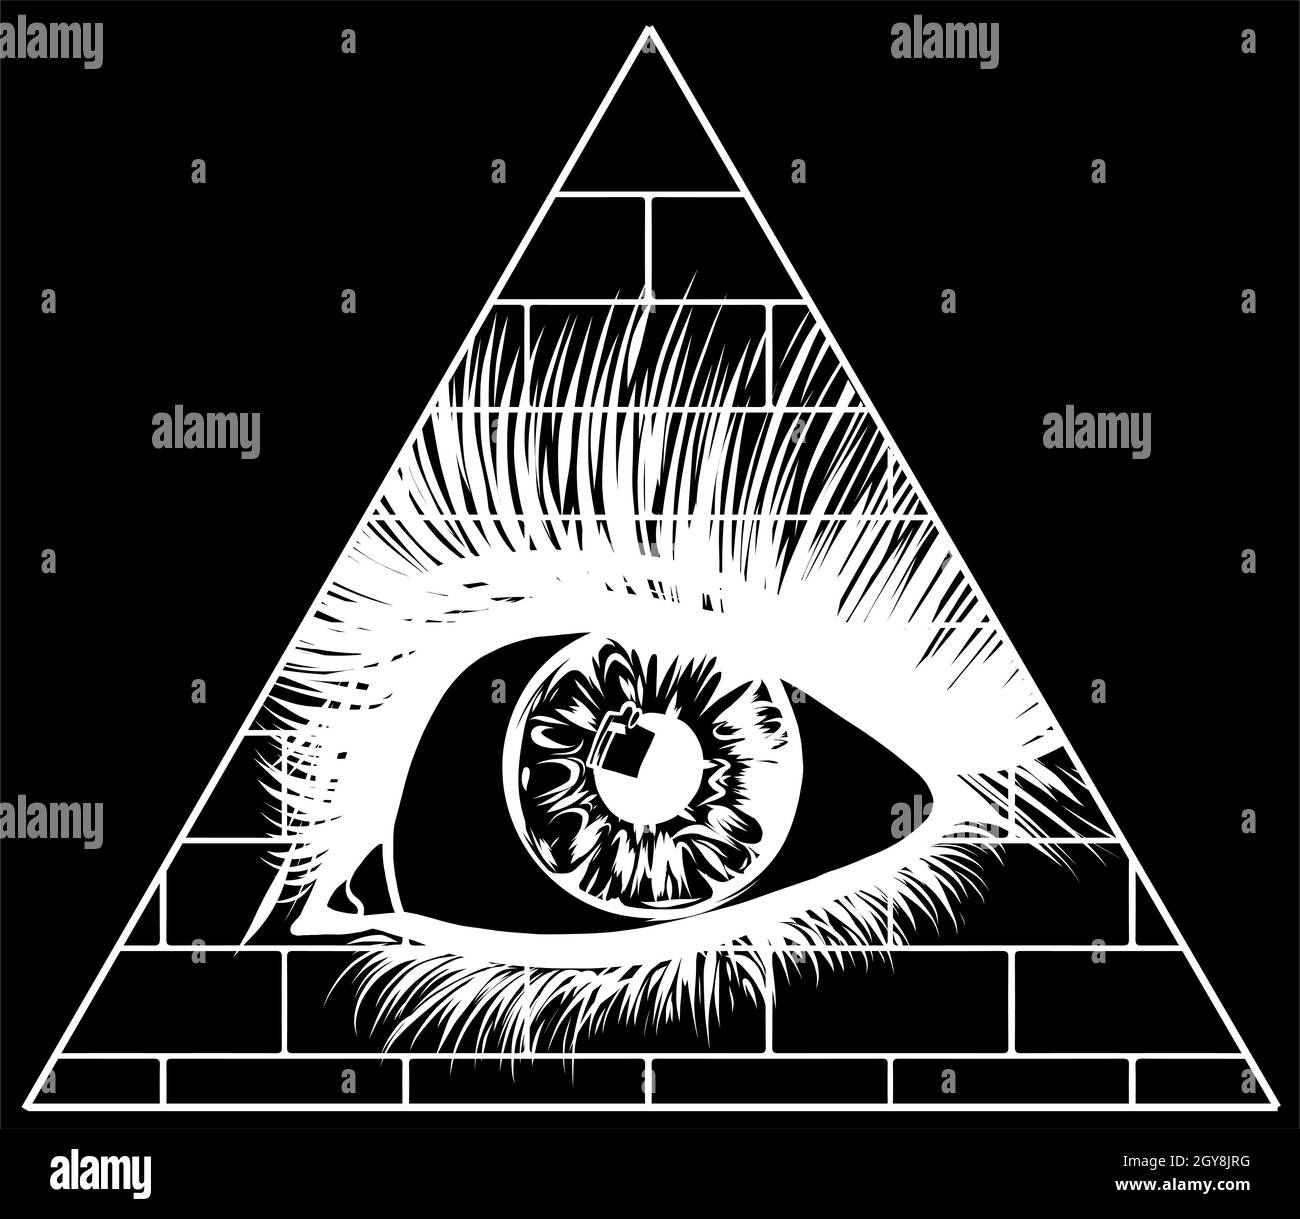 Eye of providence. All seeing eye in the triangle on top of the pyramid masonic symbol. Occult illuminati illustration. Stock Photo